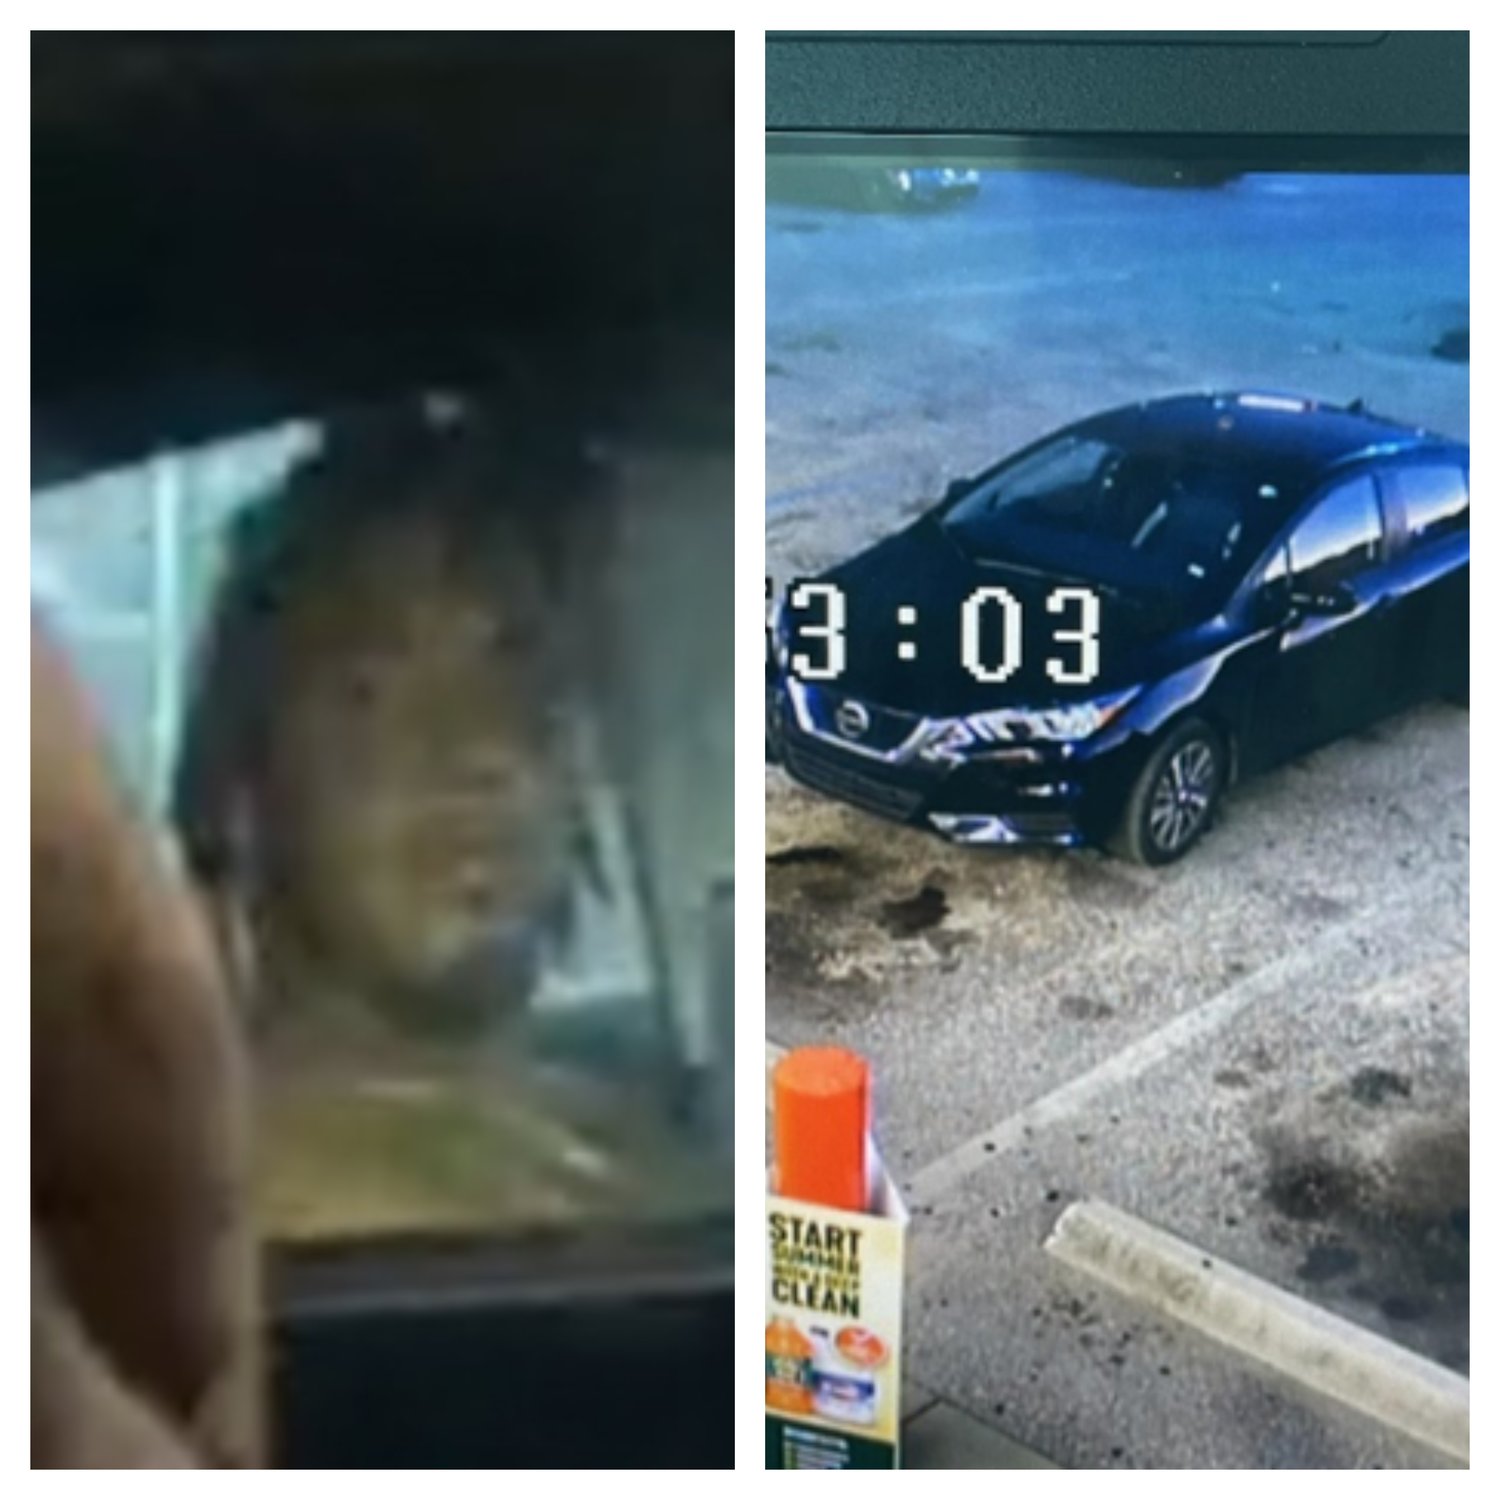 The Fayetteville Police Department on Thursday released these surveillance photos of a man they say robbed two Family Dollar stores and the vehicle he was seen getting into. The Police Department is asking the public for help in identifying the man.